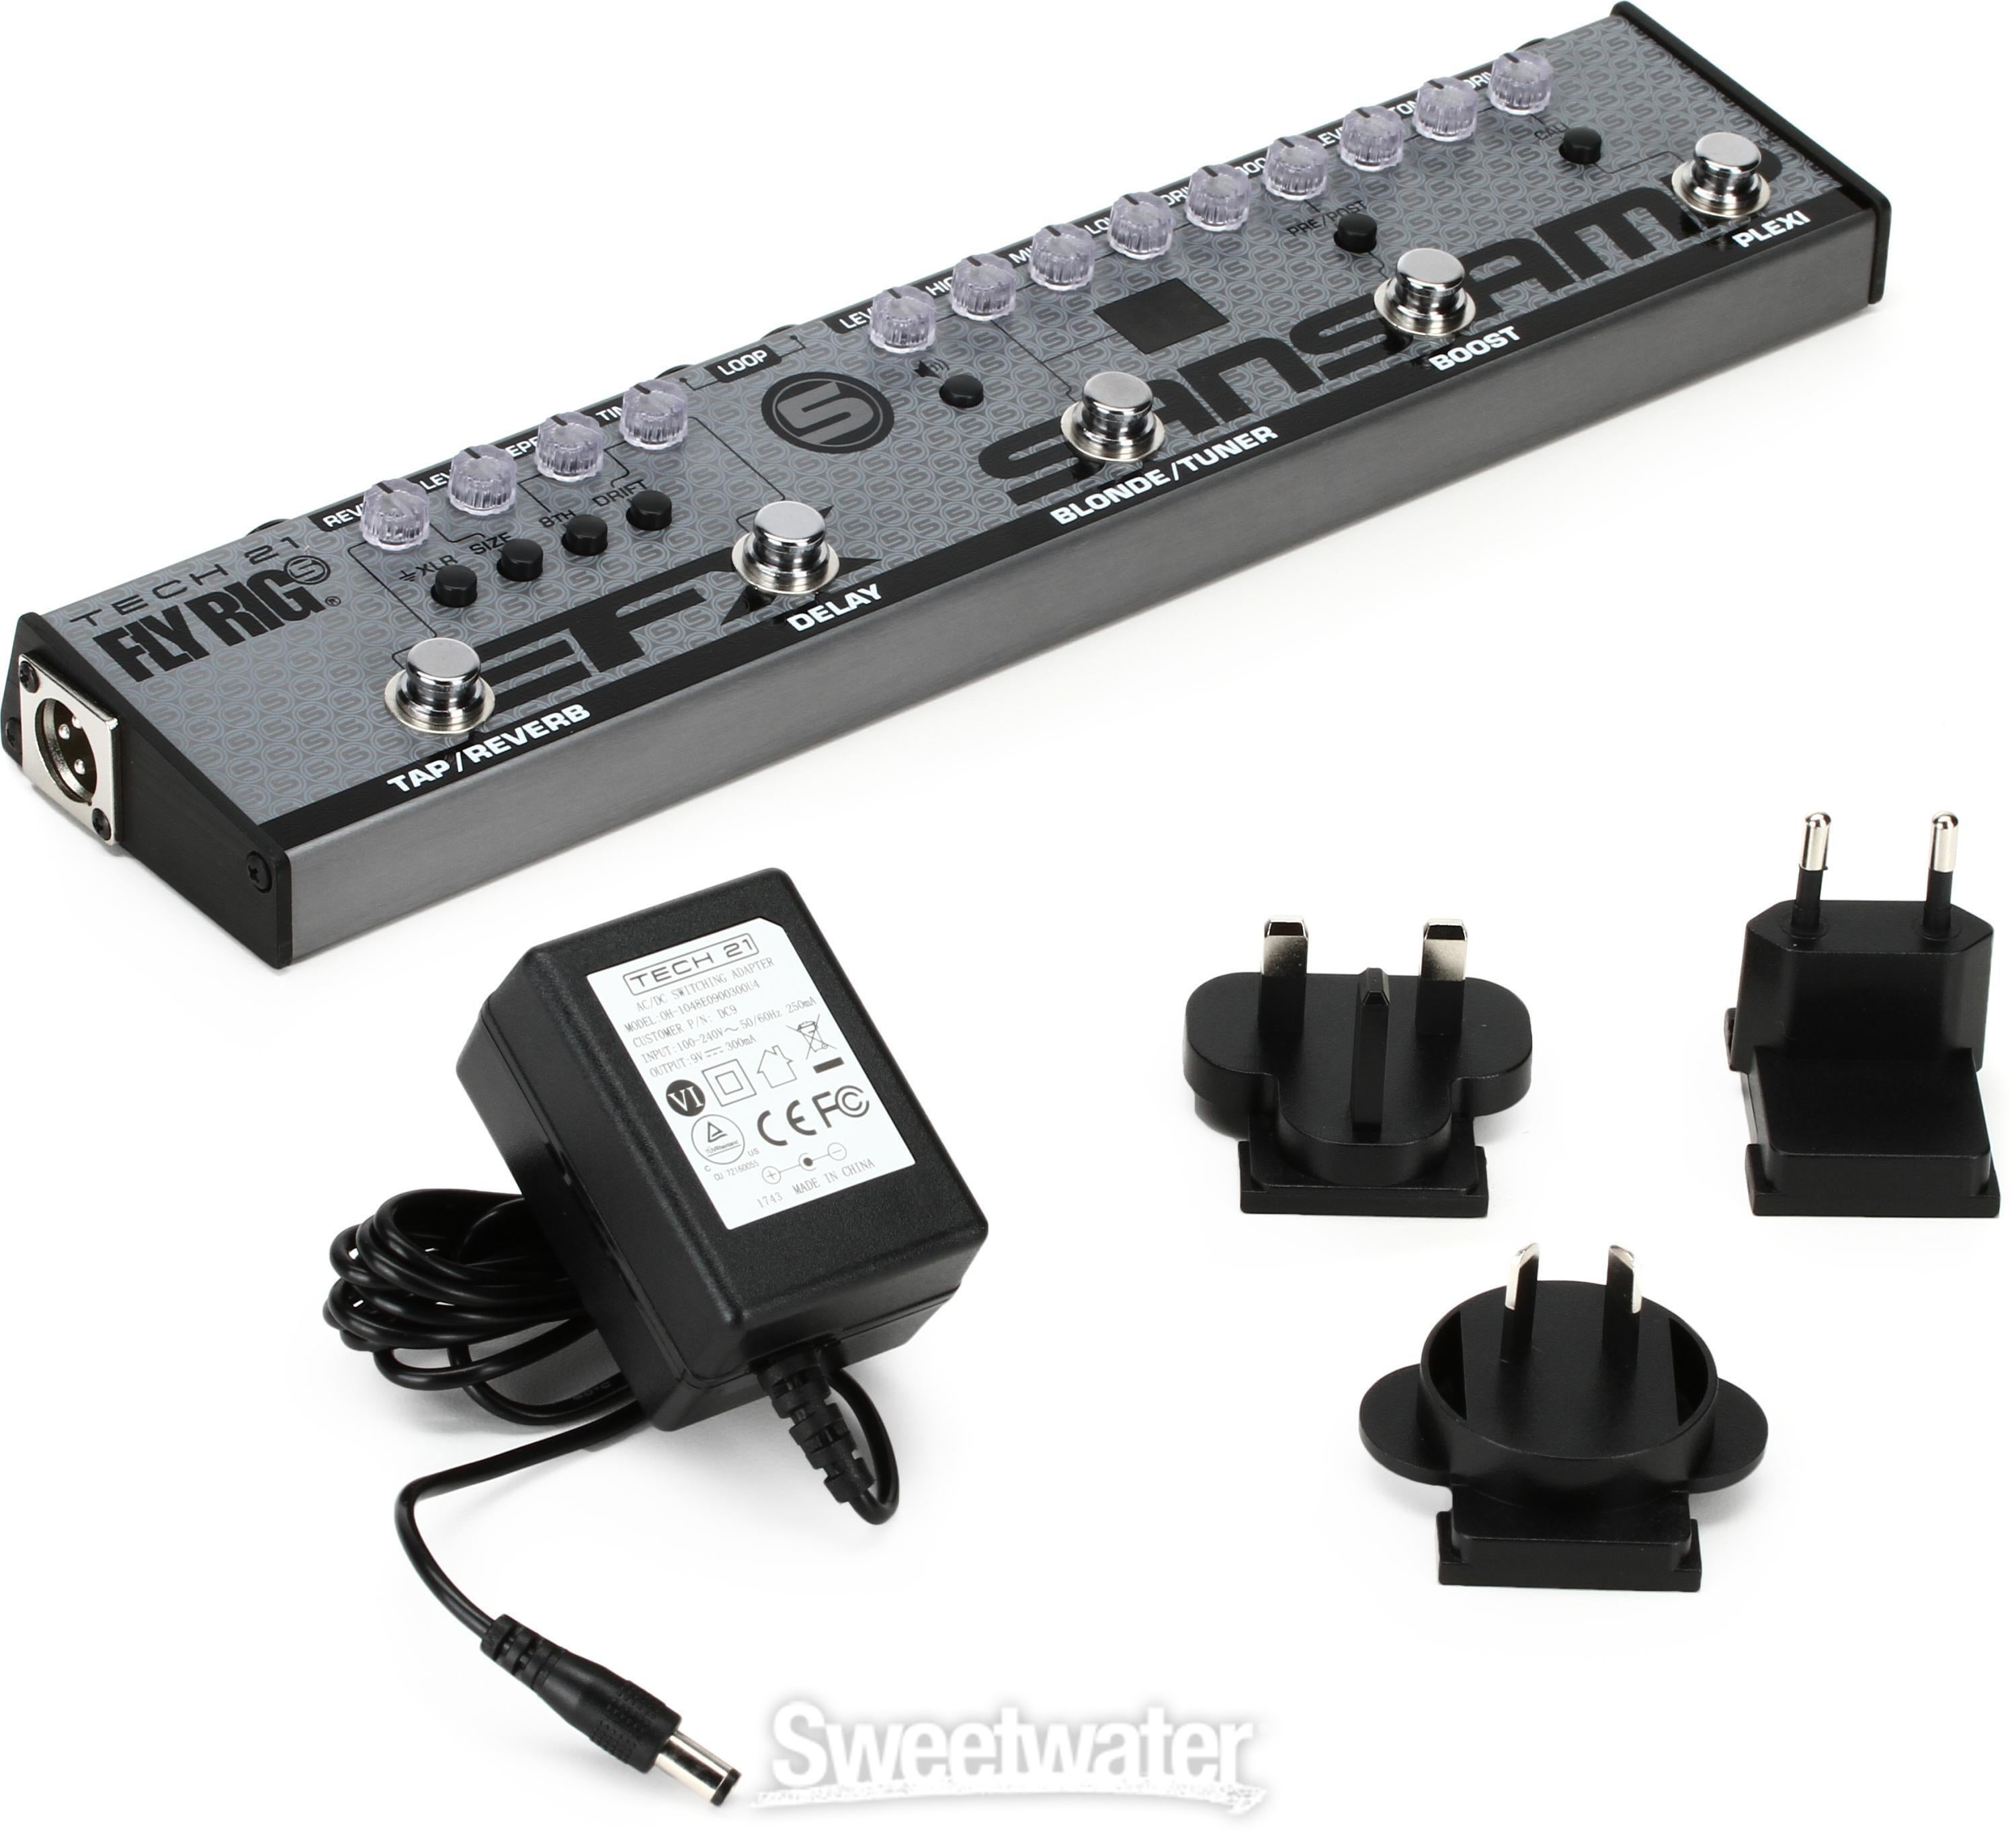 Tech 21 Fly Rig 5 v2 Multi-effects Pedal | Sweetwater